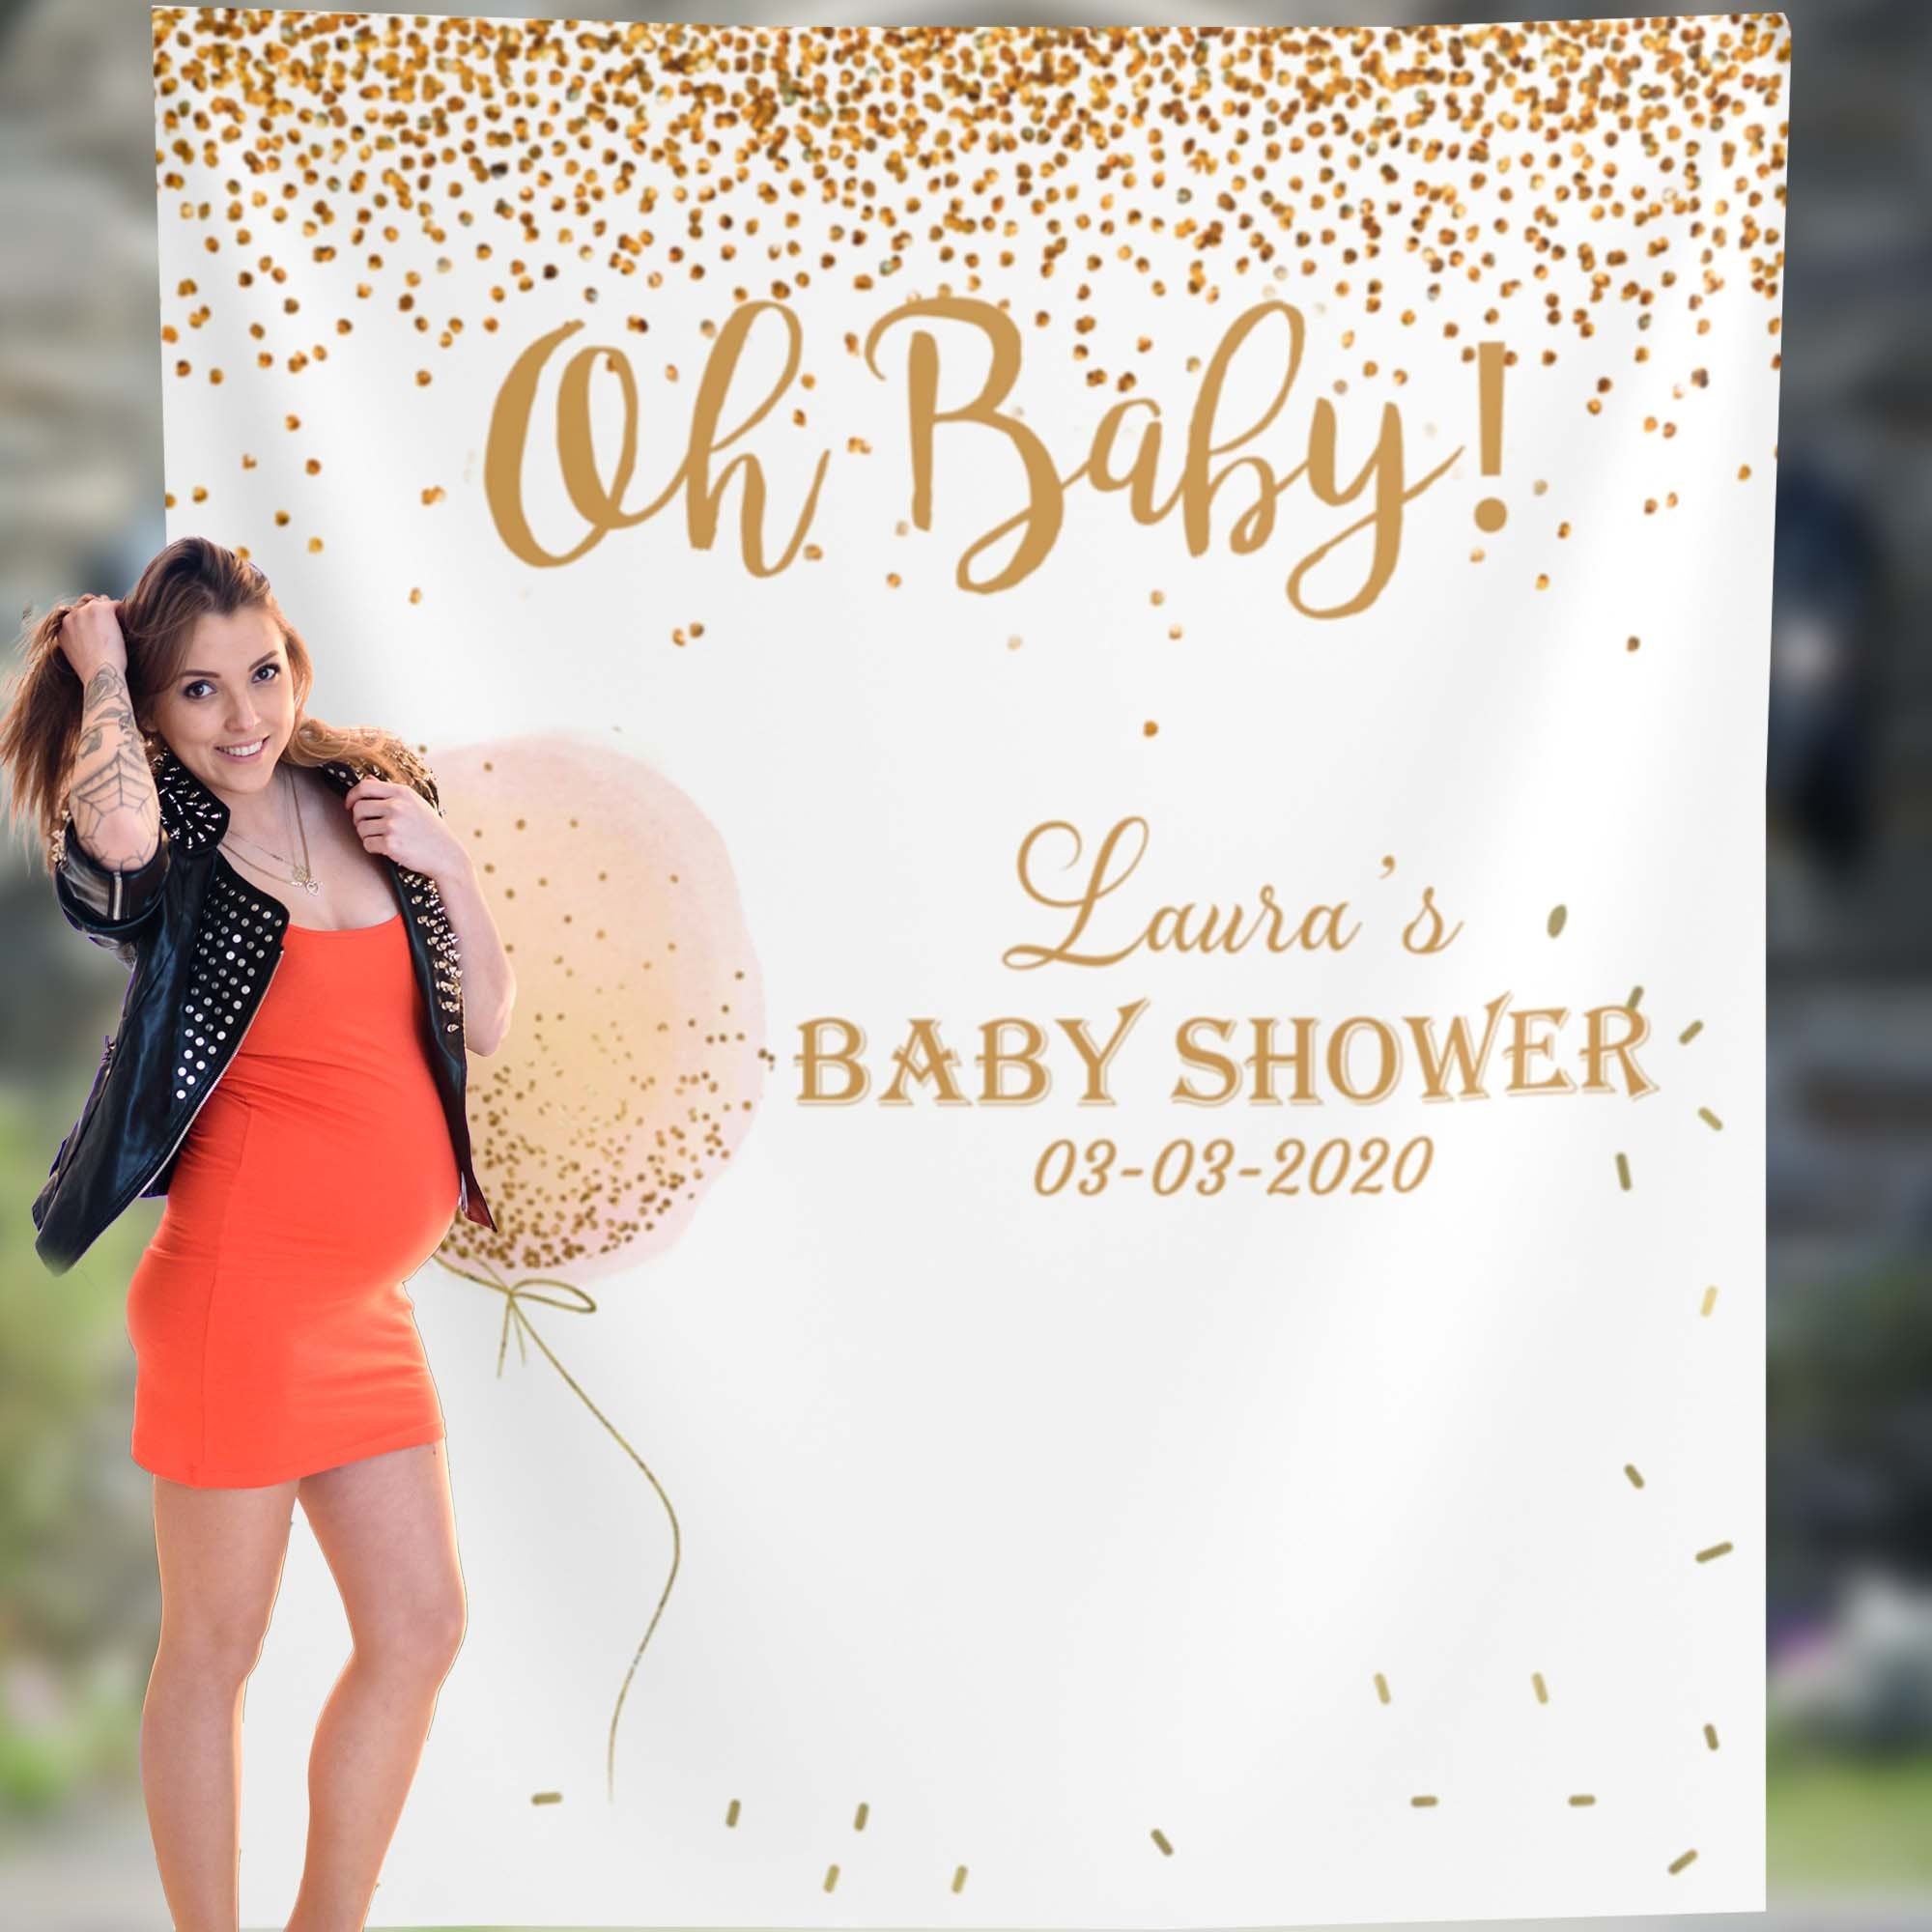 Gold Glitter Cofetti Baby Shower Backdrop, White and Gold Glitter Shower Decoration, Oh baby Balloon Photo Backdrop, Baby Sprinkle, 01OBG6